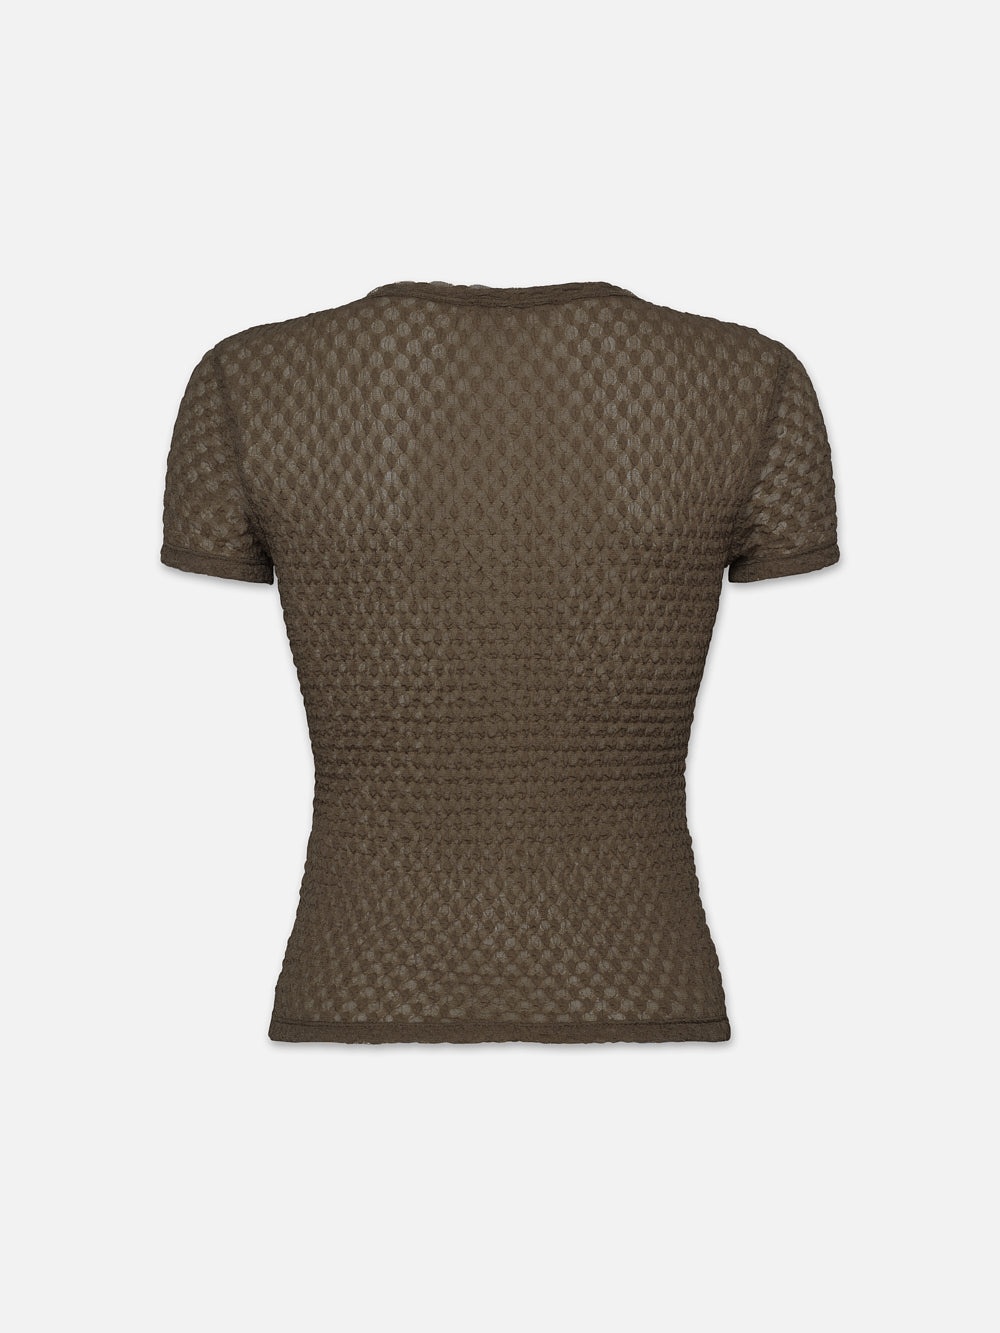 Mesh Lace Baby Tee in Cypress - 3